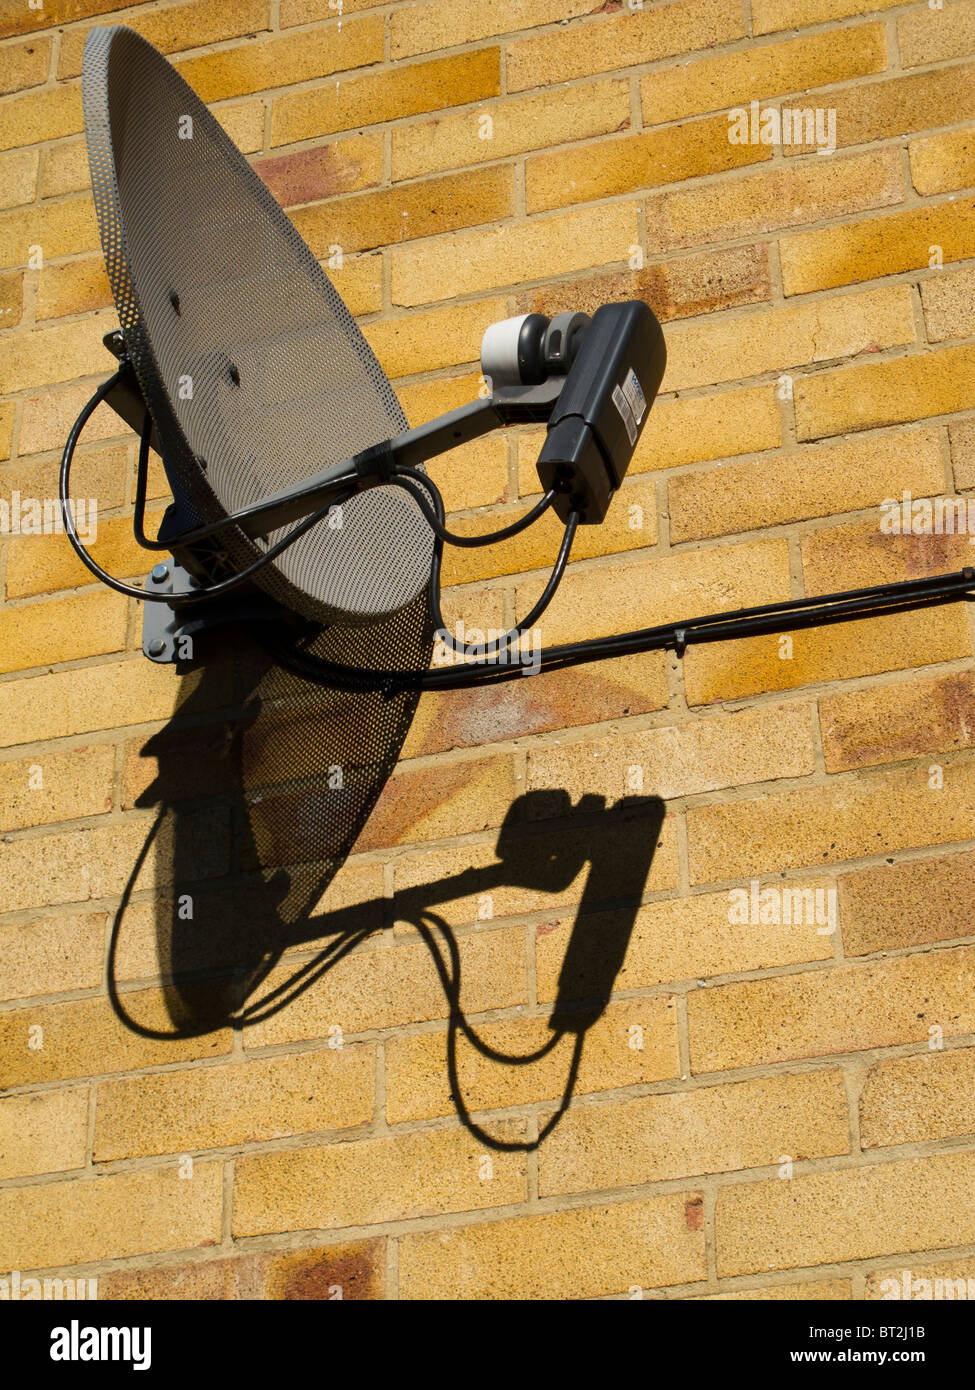 A BSkyB television satellite Ariel mounted on the wall of a house in the UK Stock Photo